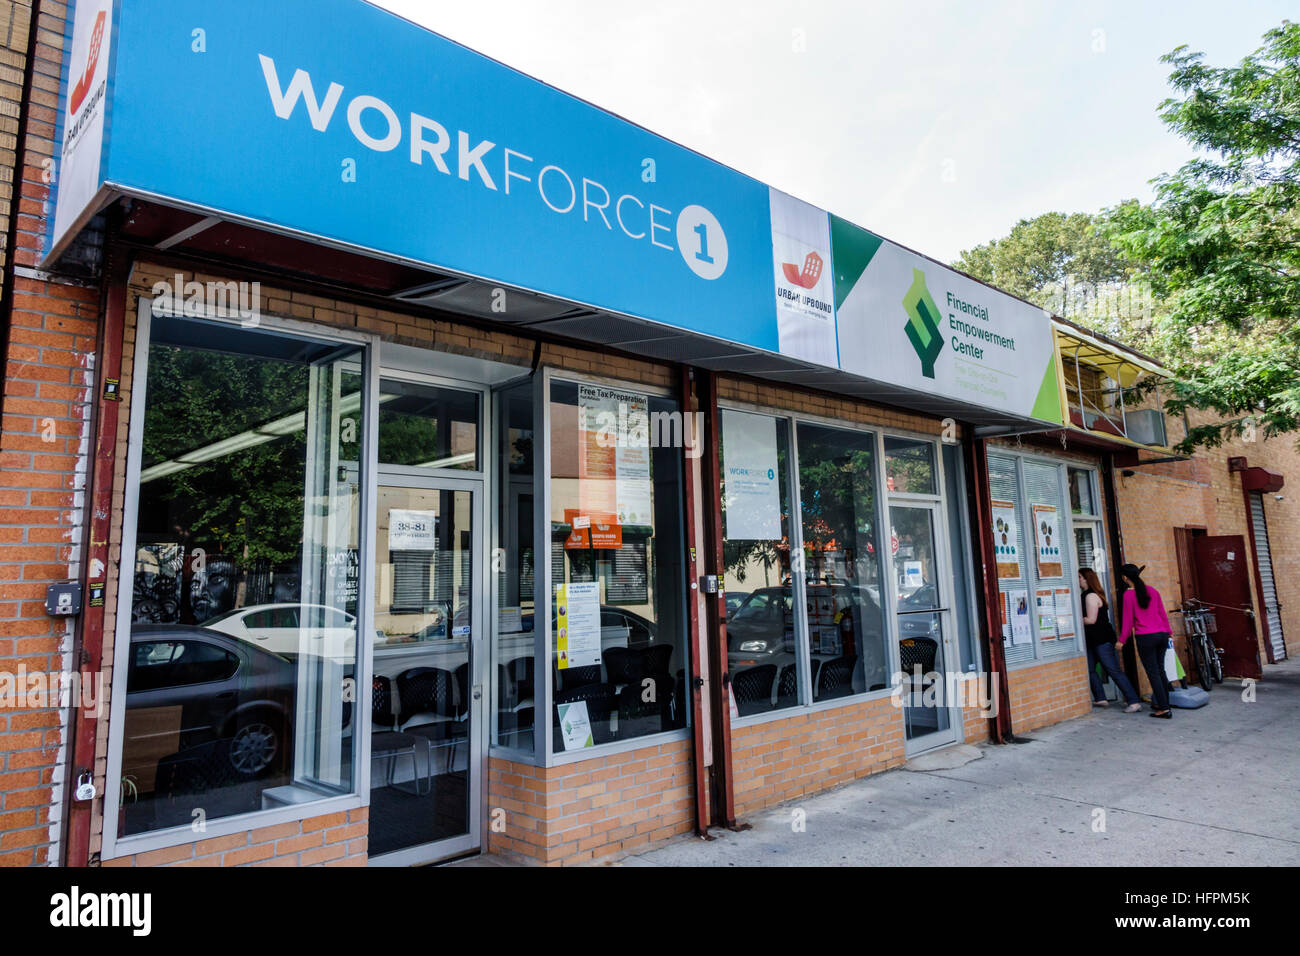 New York City,NY NYC Long Island City,Workforce1 Career Center,employment center,storefront,sign,front,entrance,NY160723003 Stock Photo